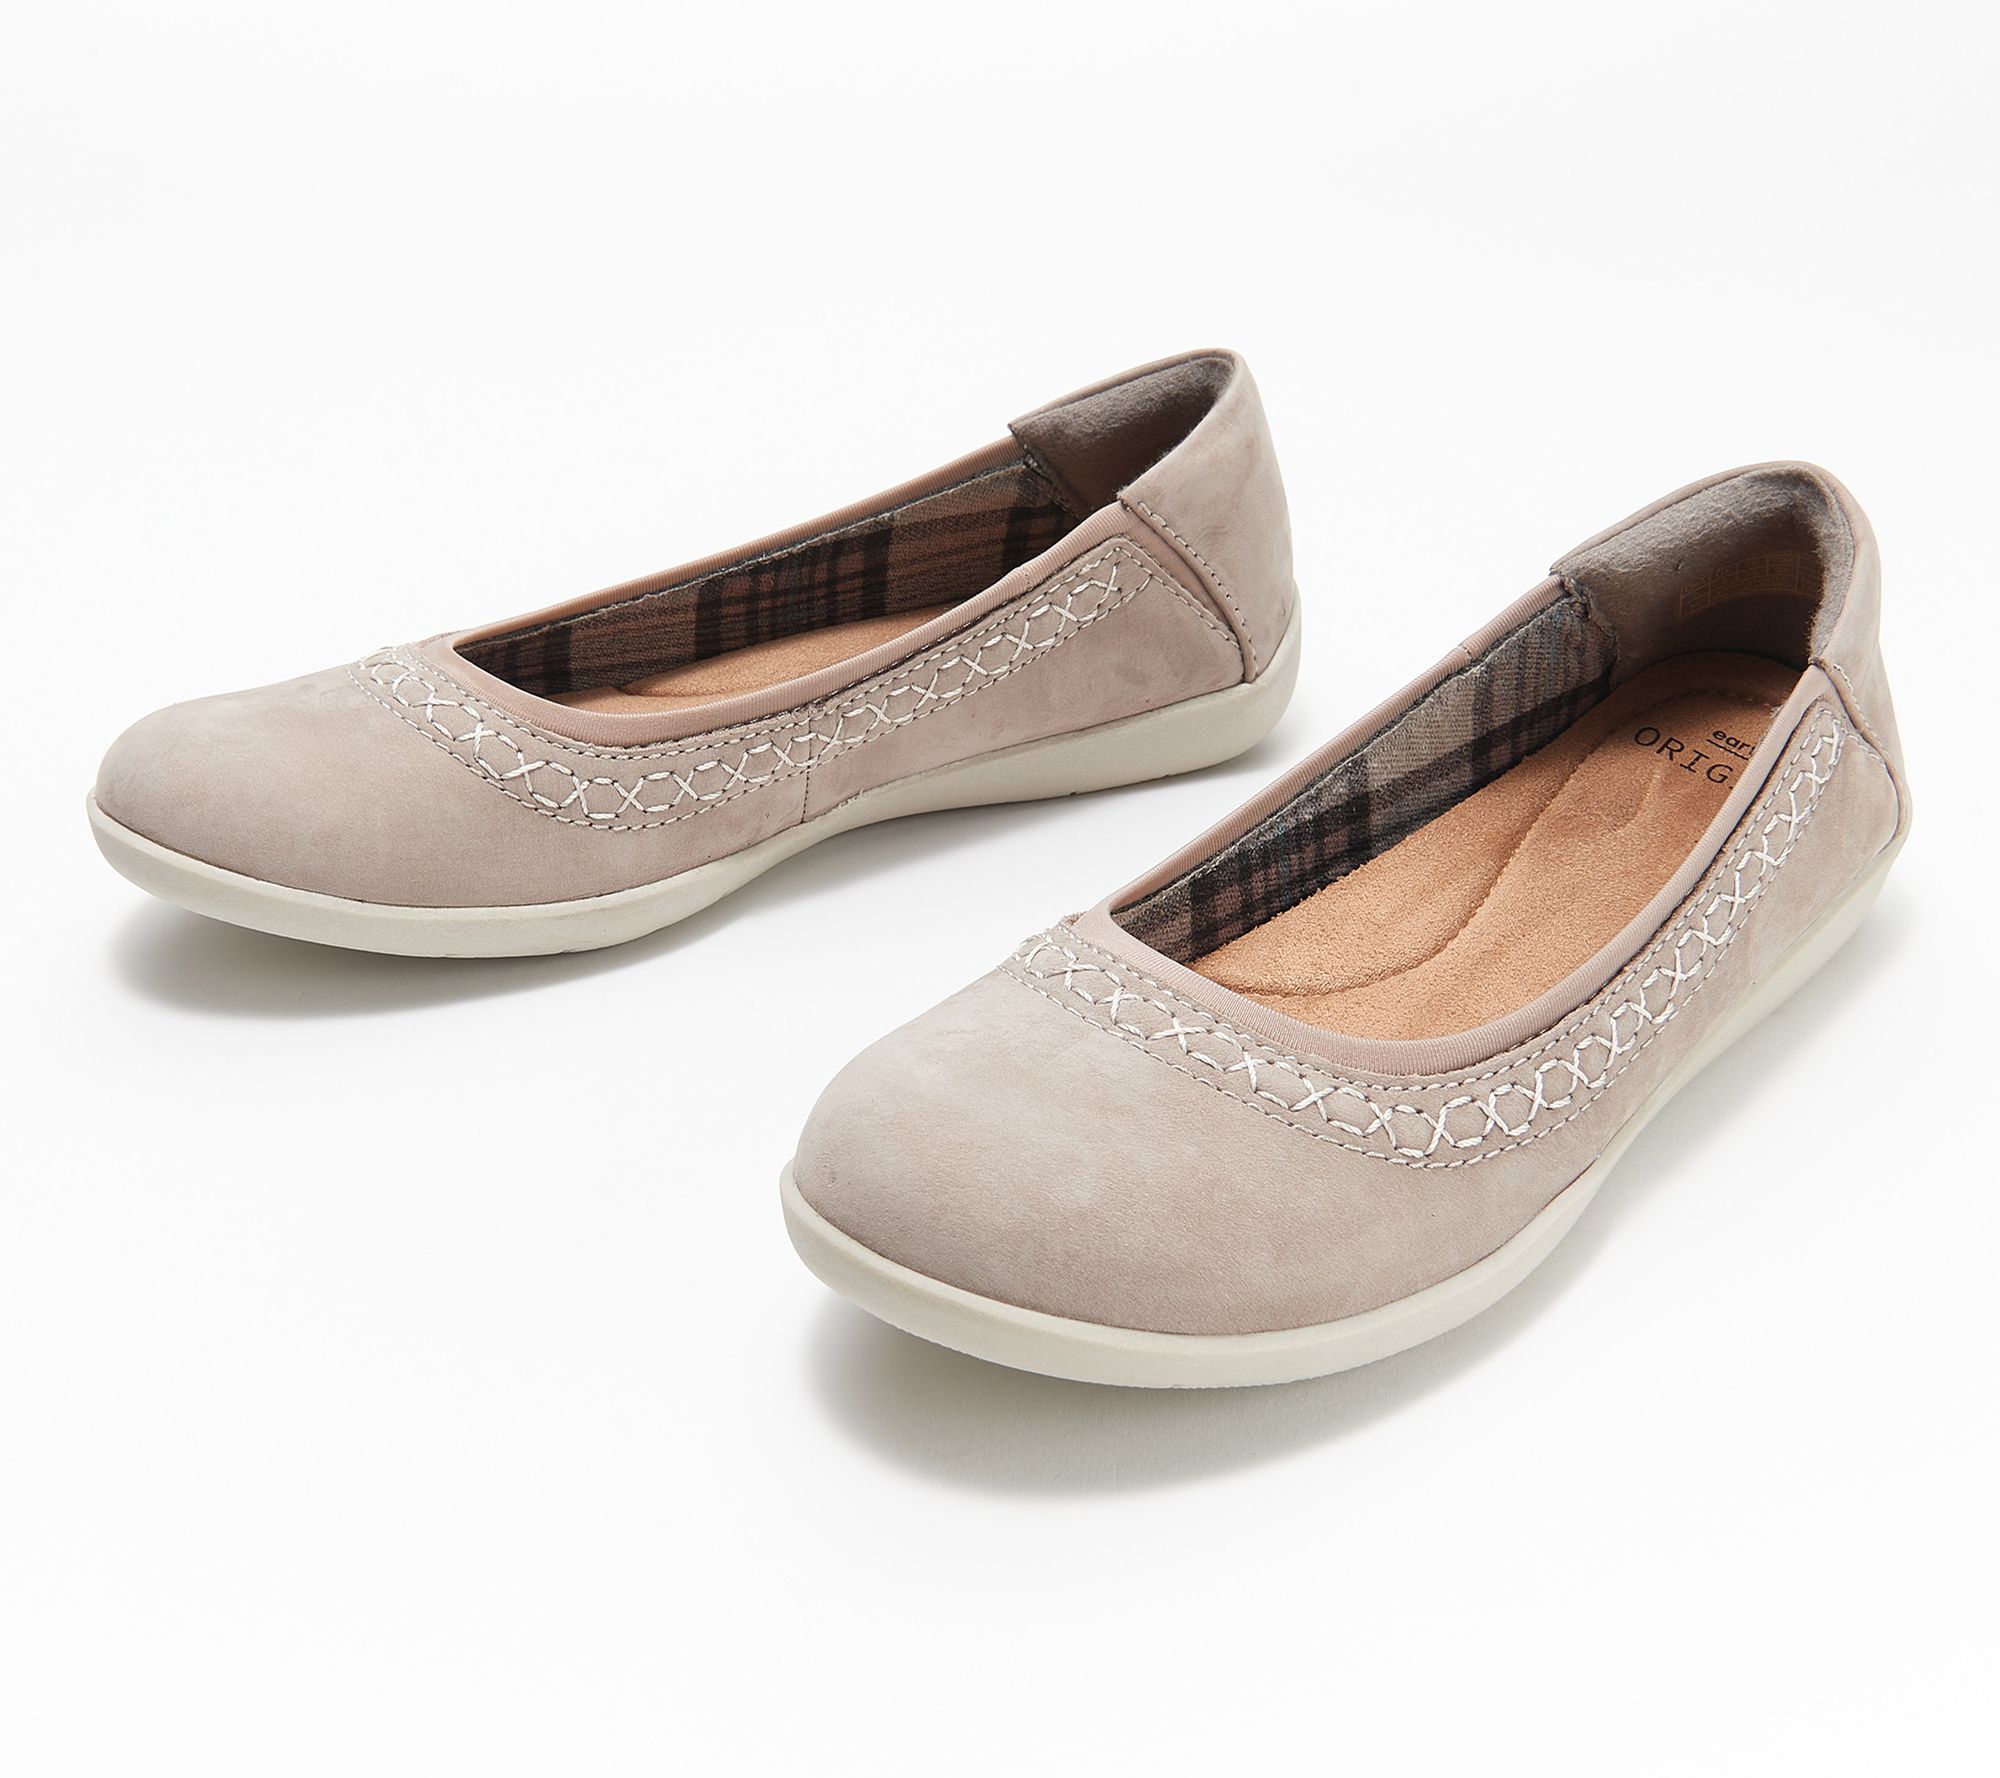 afsked Parcel Converge Earth Origins Leather Whipstitch Flats - Fable - QVC.com